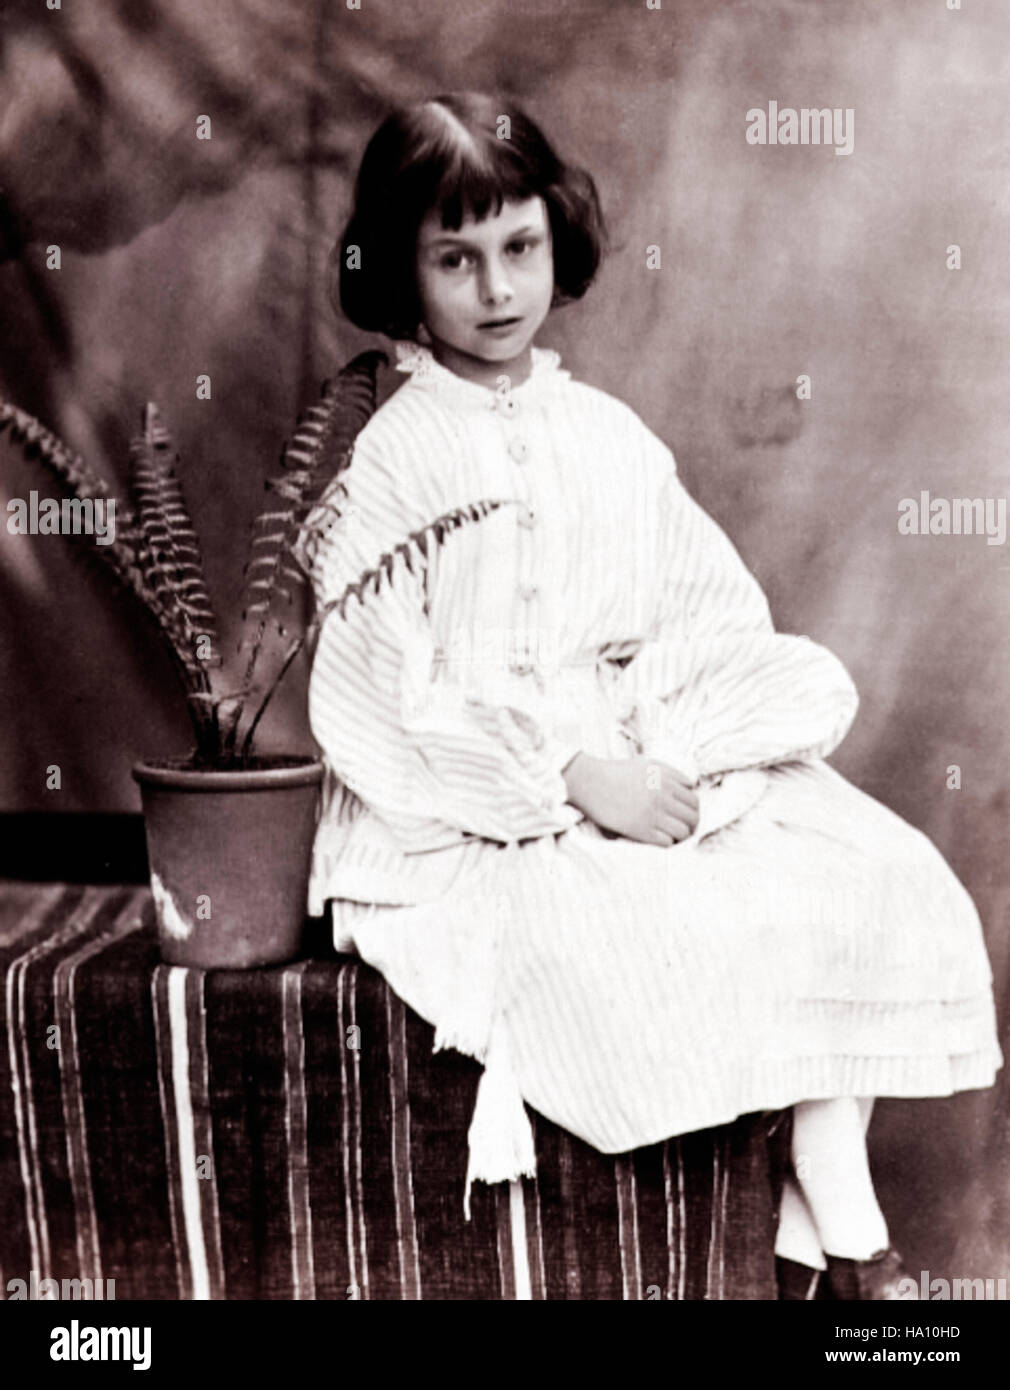 Alice Liddell (1852-1934) aged 7, inspiration for Alice's Adventures in Wonderland by Lewis Carroll, photograph by Charles Lutwidge Dodgson (aka Lewis Carroll) in 1860. Stock Photo